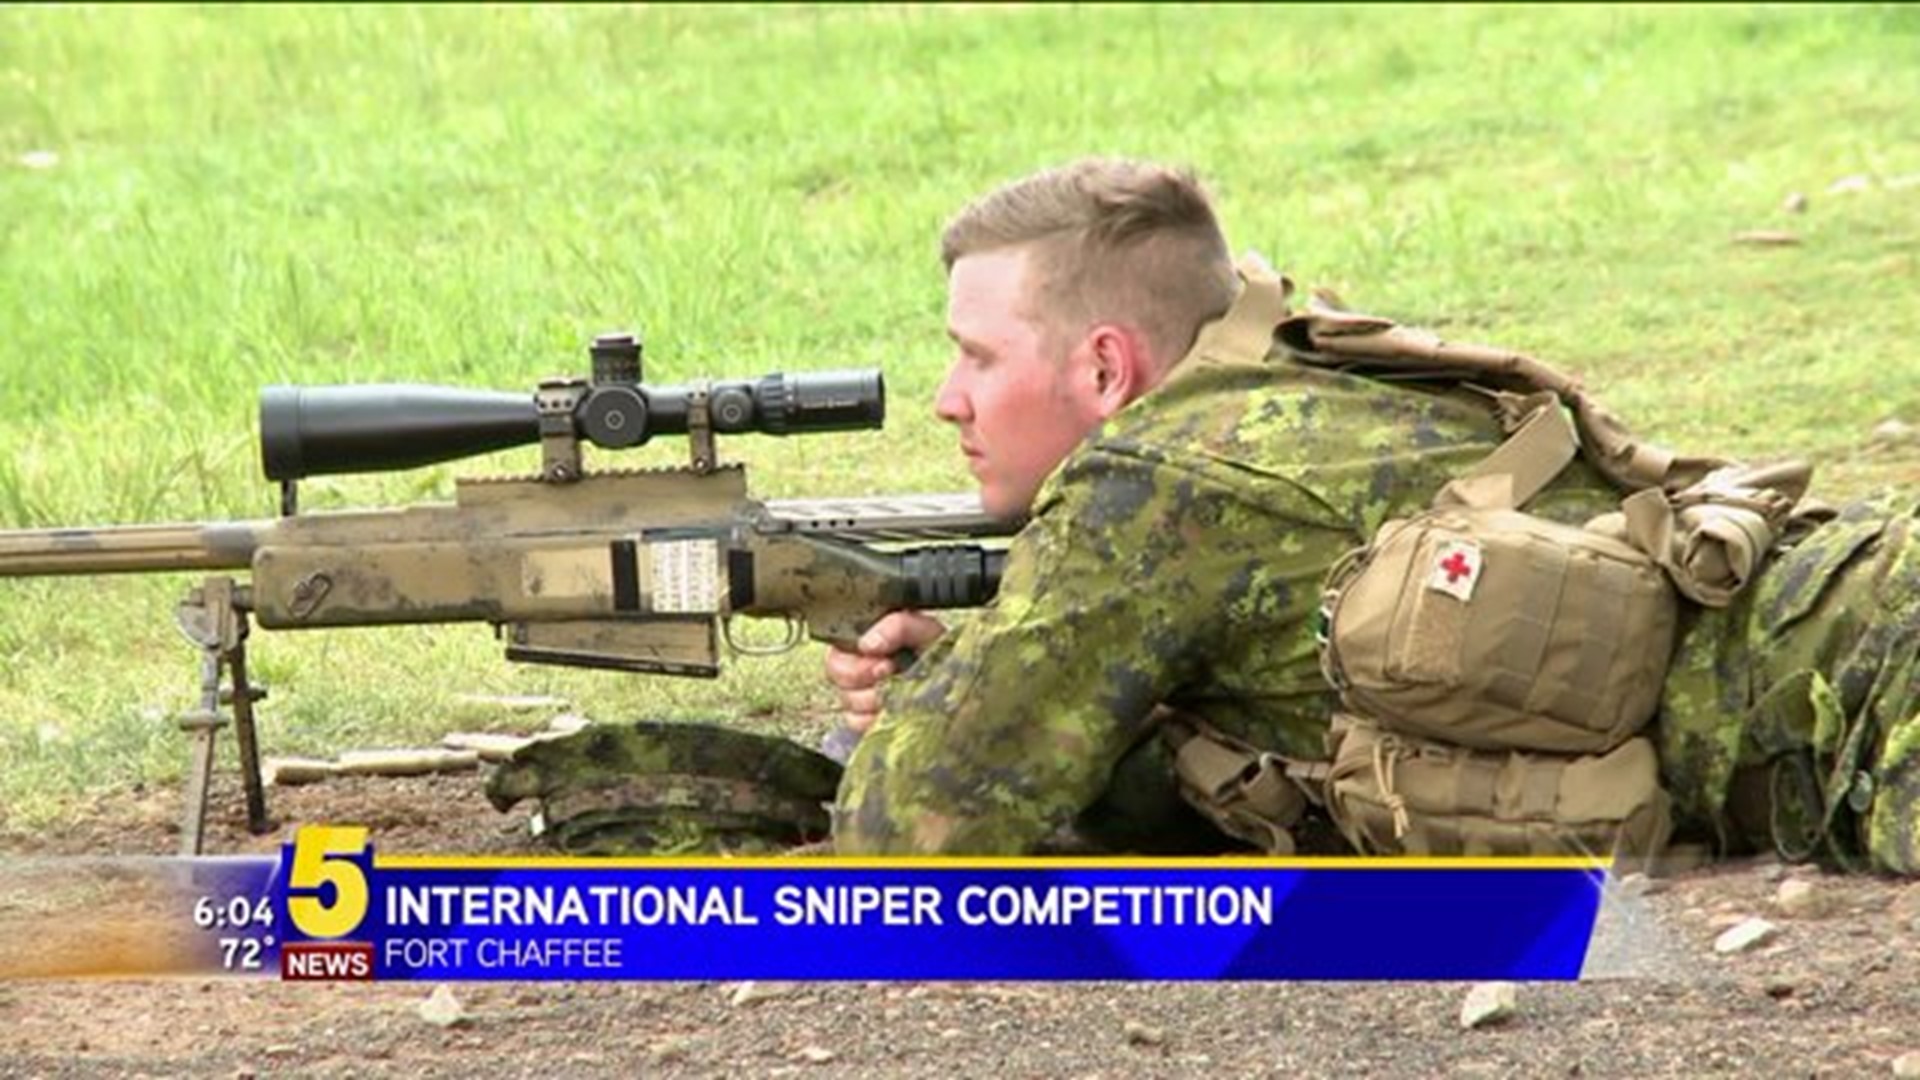 Sniper Competition at Fort Chaffee